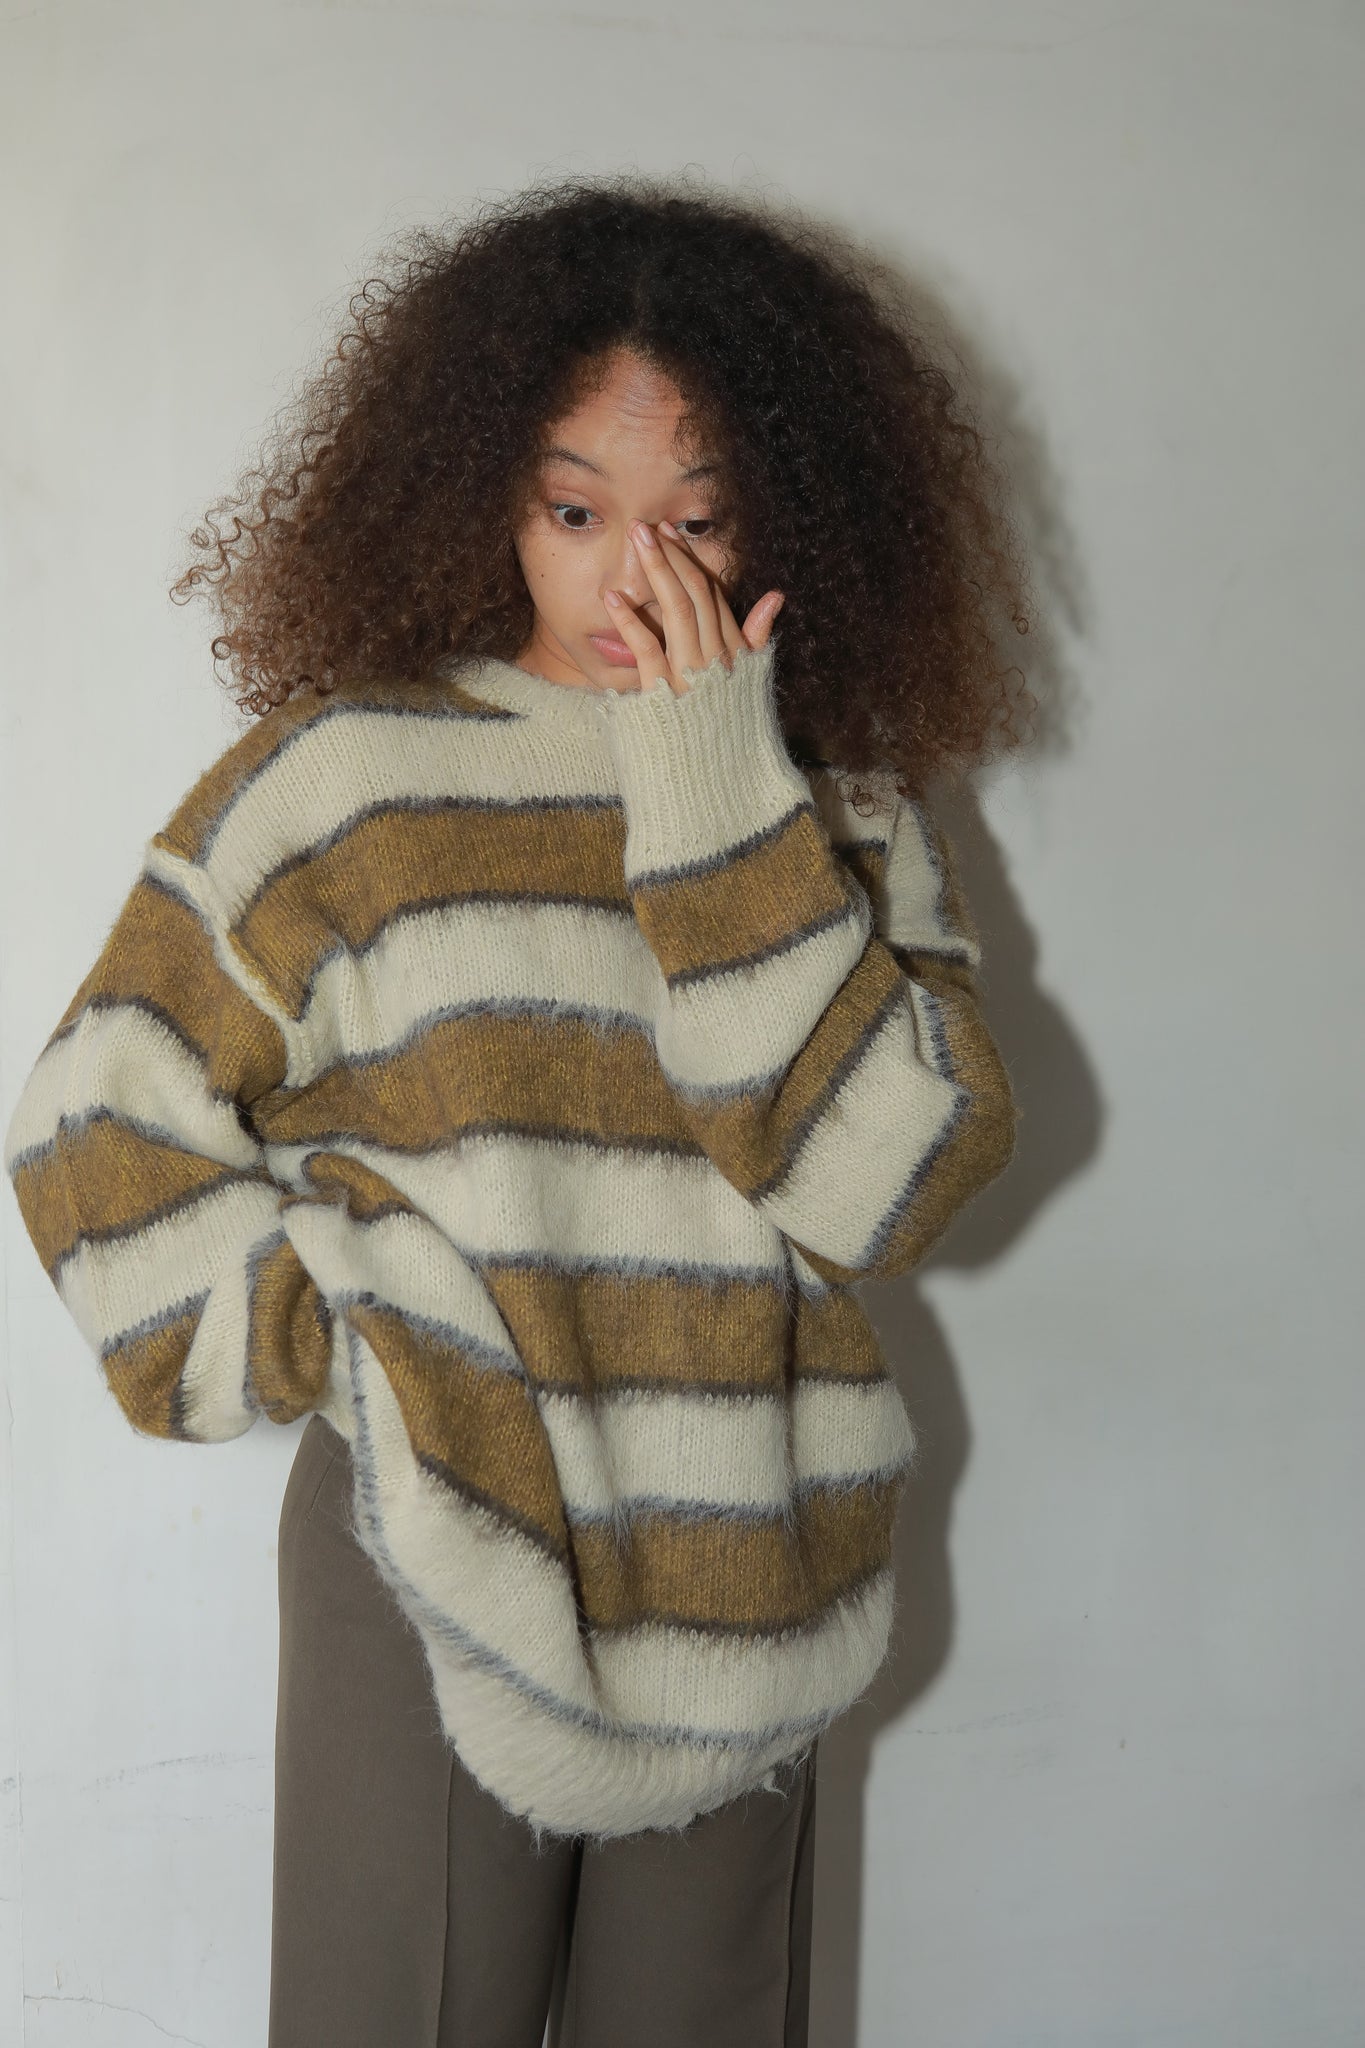 border mohair knit – Hey life store